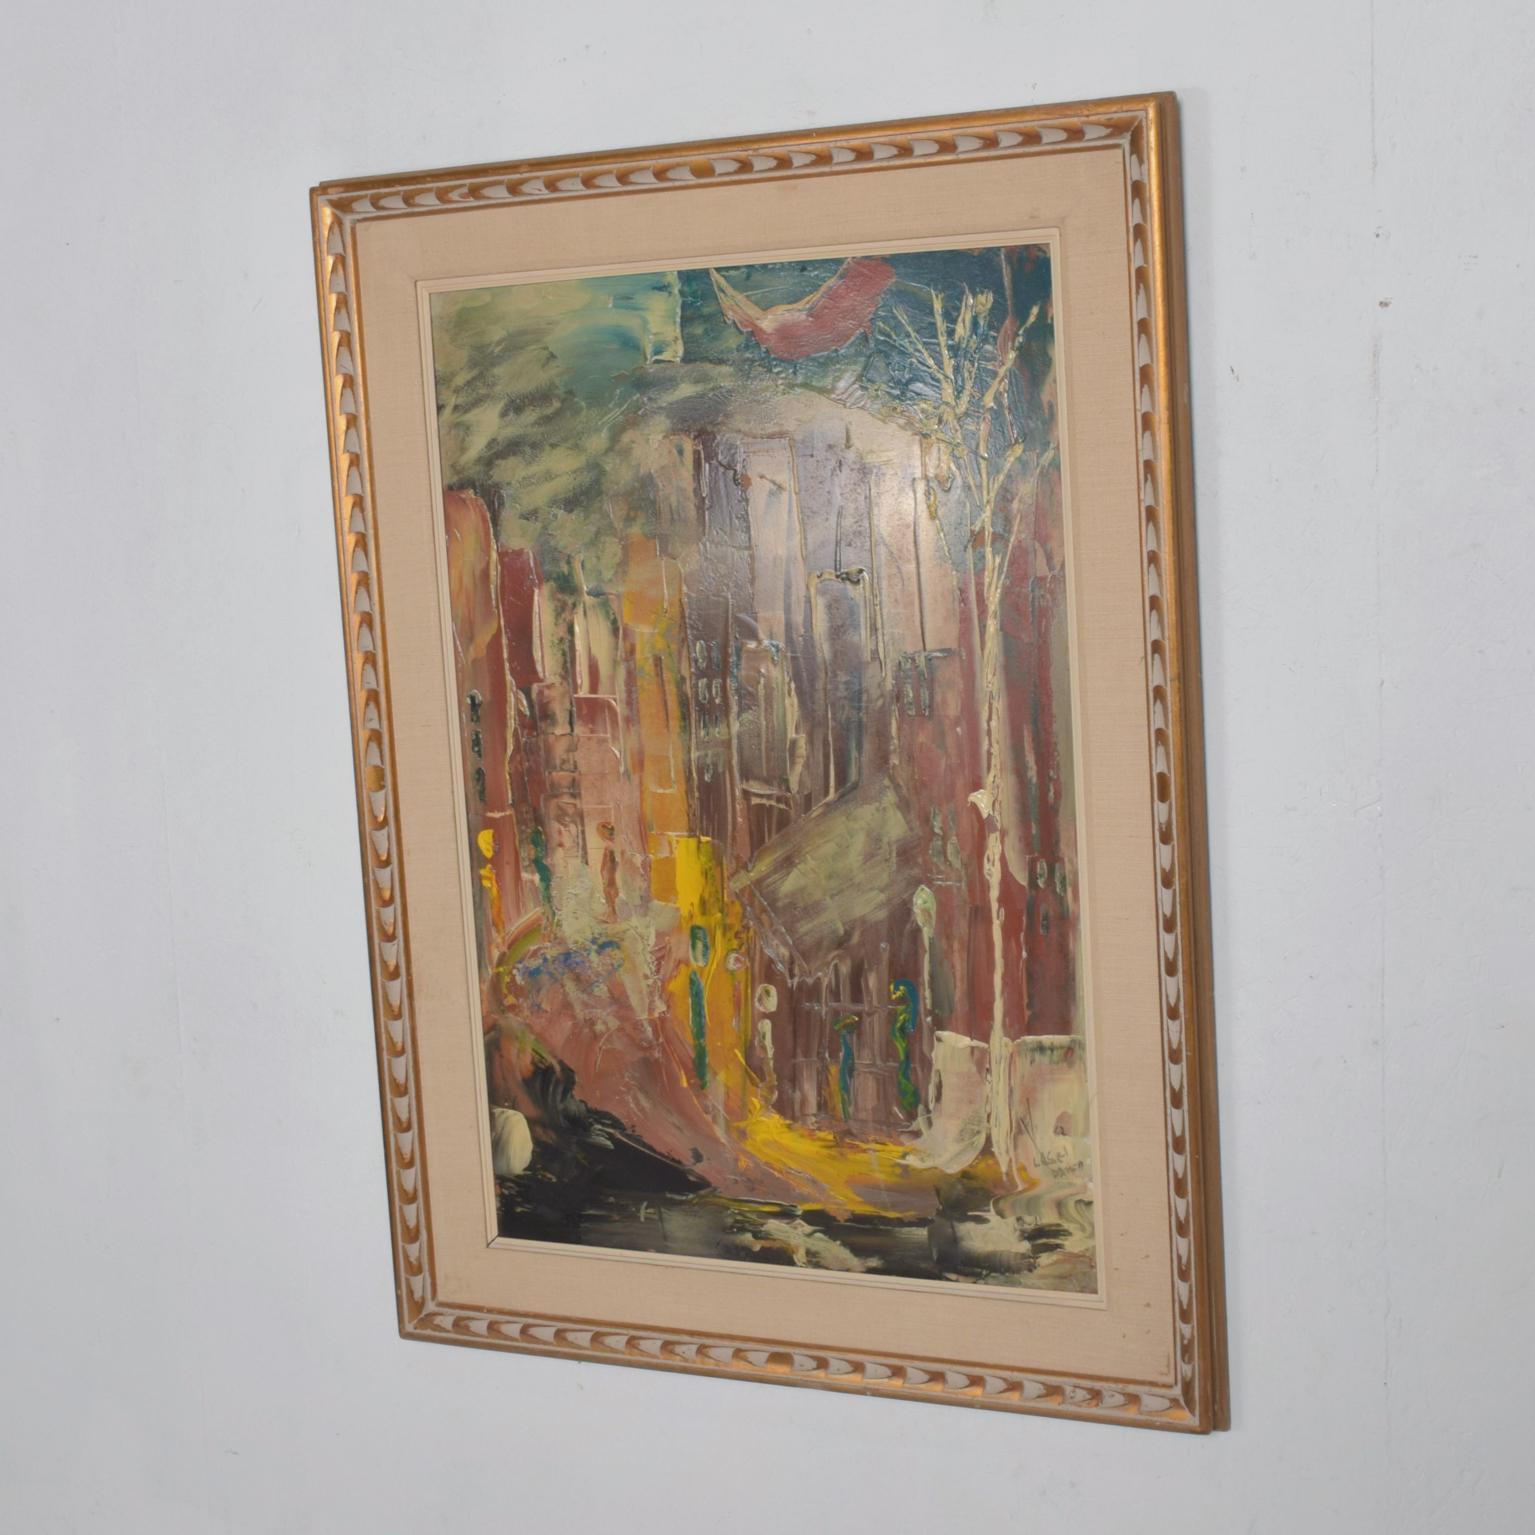 AMBIANIC offers
Mid Century Modern Abstract oil on board painting 1960s
Signed dated 1962
Dimensions: 32